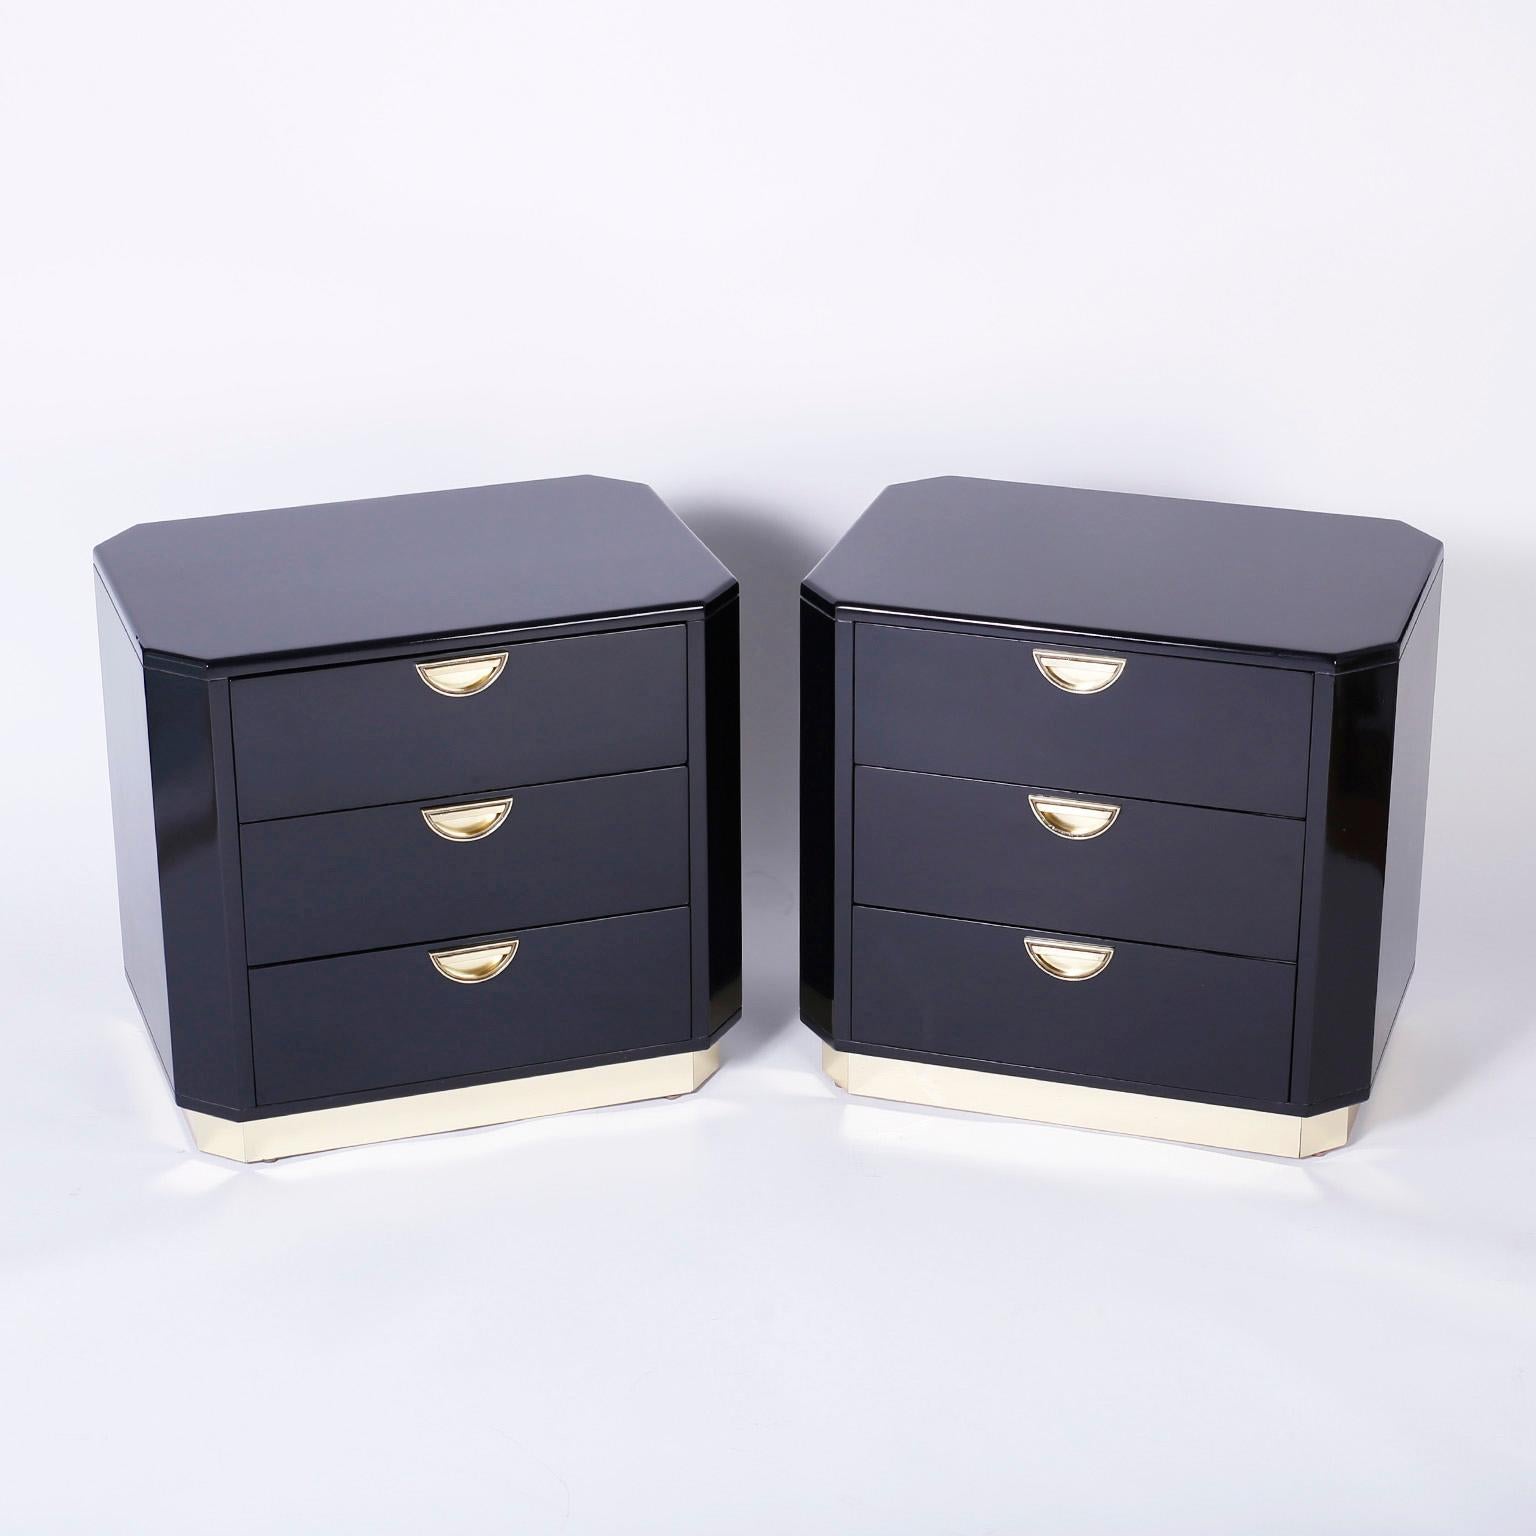 In voque pair of three drawer black lacquered nightstands with a sleek refined form, inset brass pulls and a brass block foot. Signed John Widdicomb in a drawer.